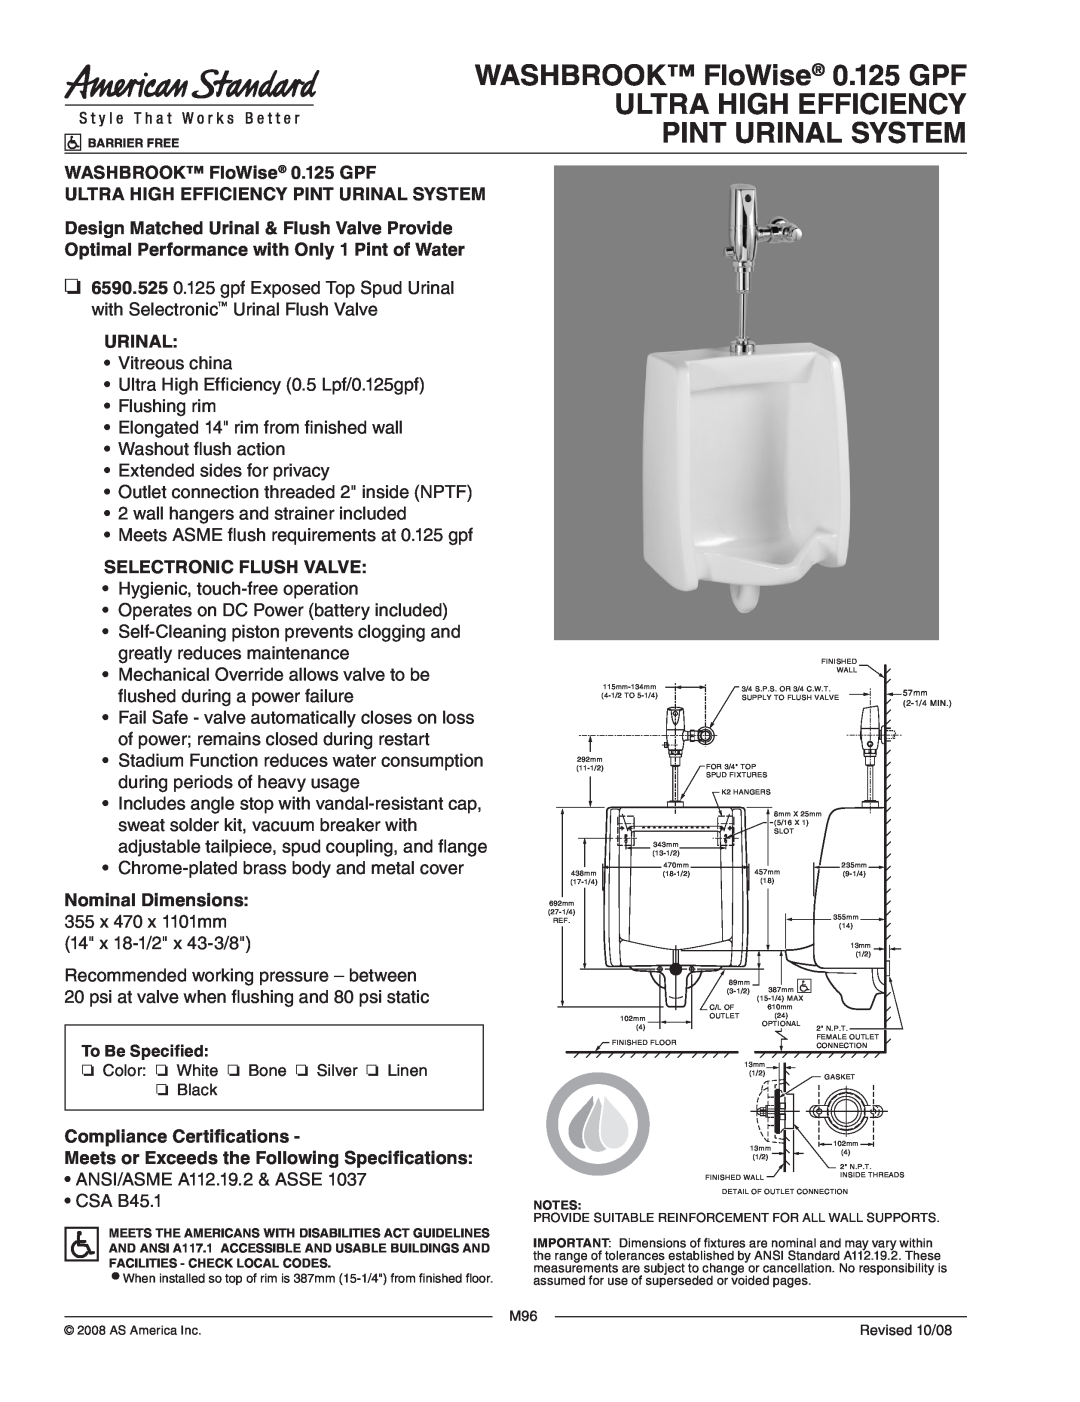 American Standard 6590.525 dimensions WASHBROOK FloWise 0.125 GPF, Ultra High Efficiency Pint Urinal System 